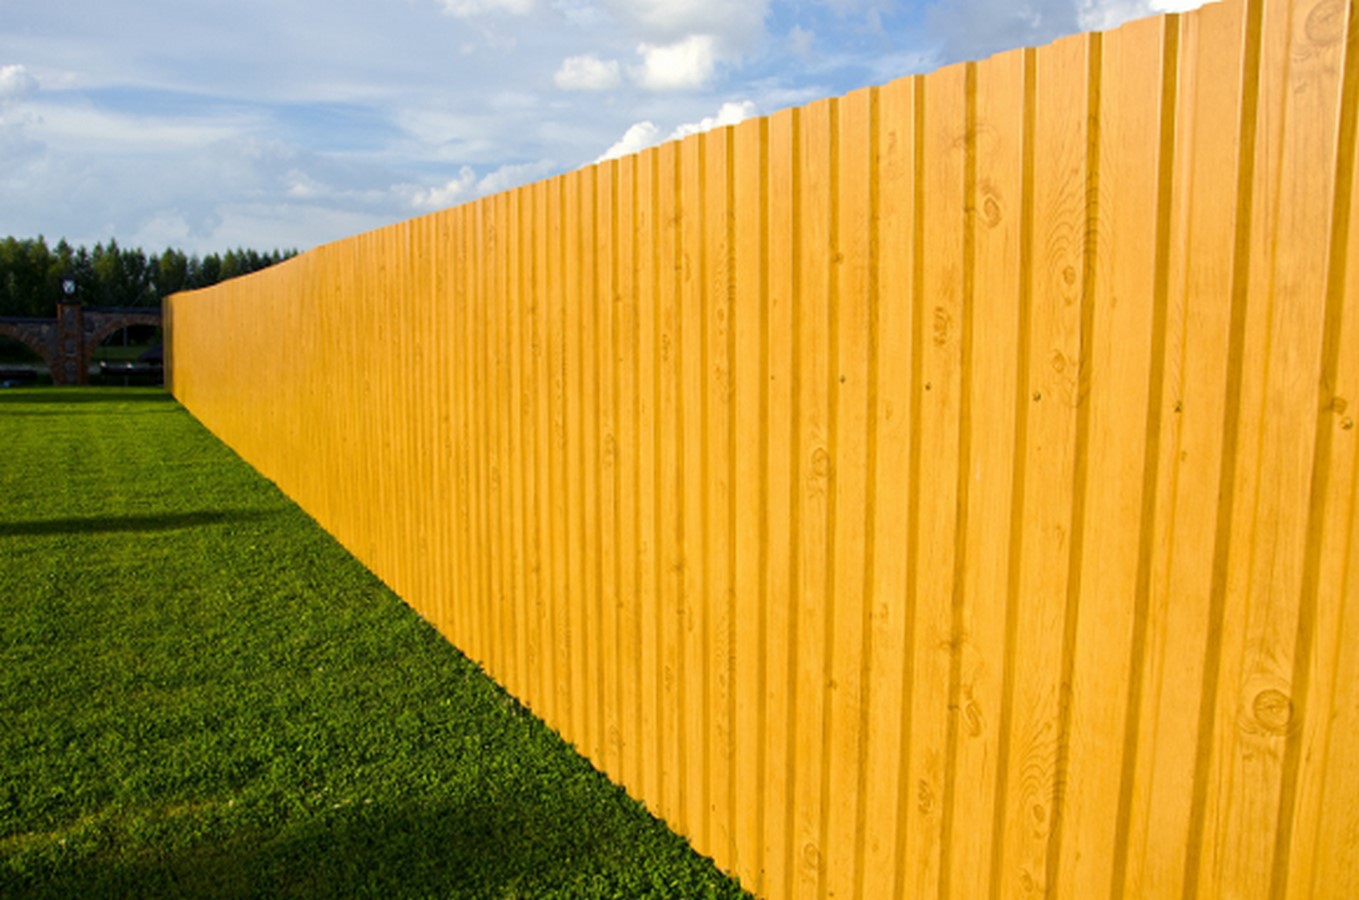 Fence Repair and Installation